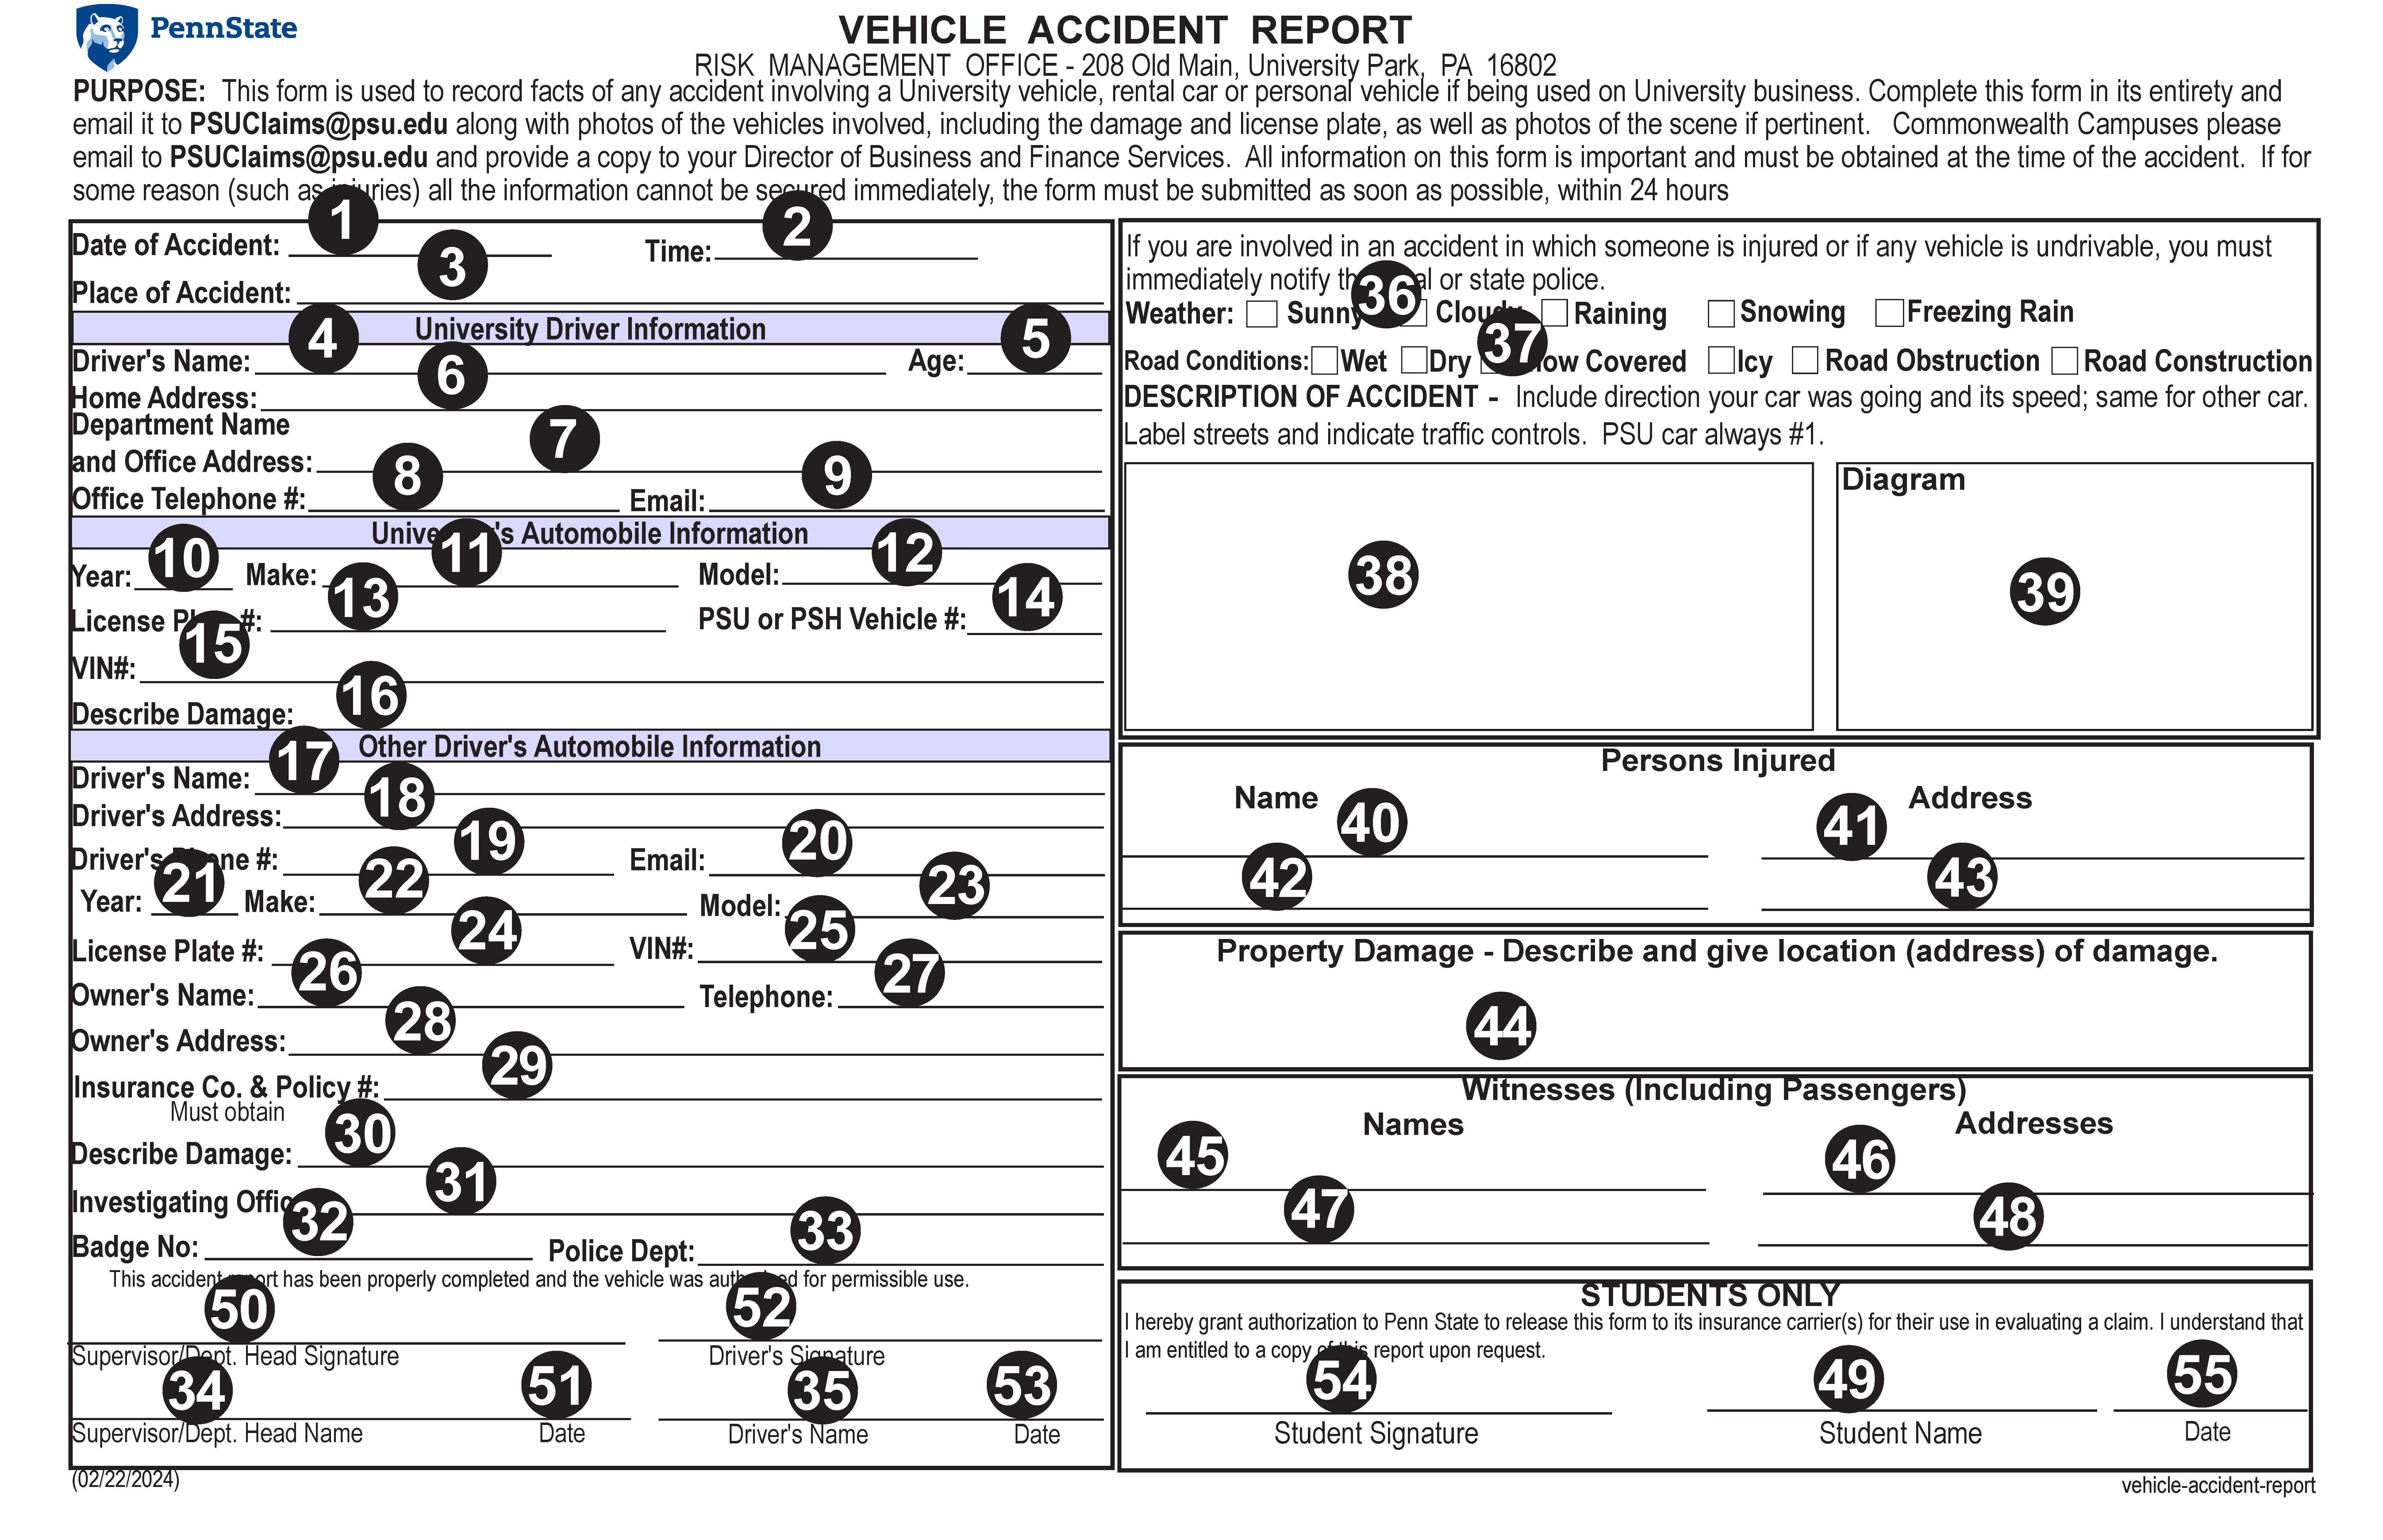 Image Of Vehicle Accident Report Form